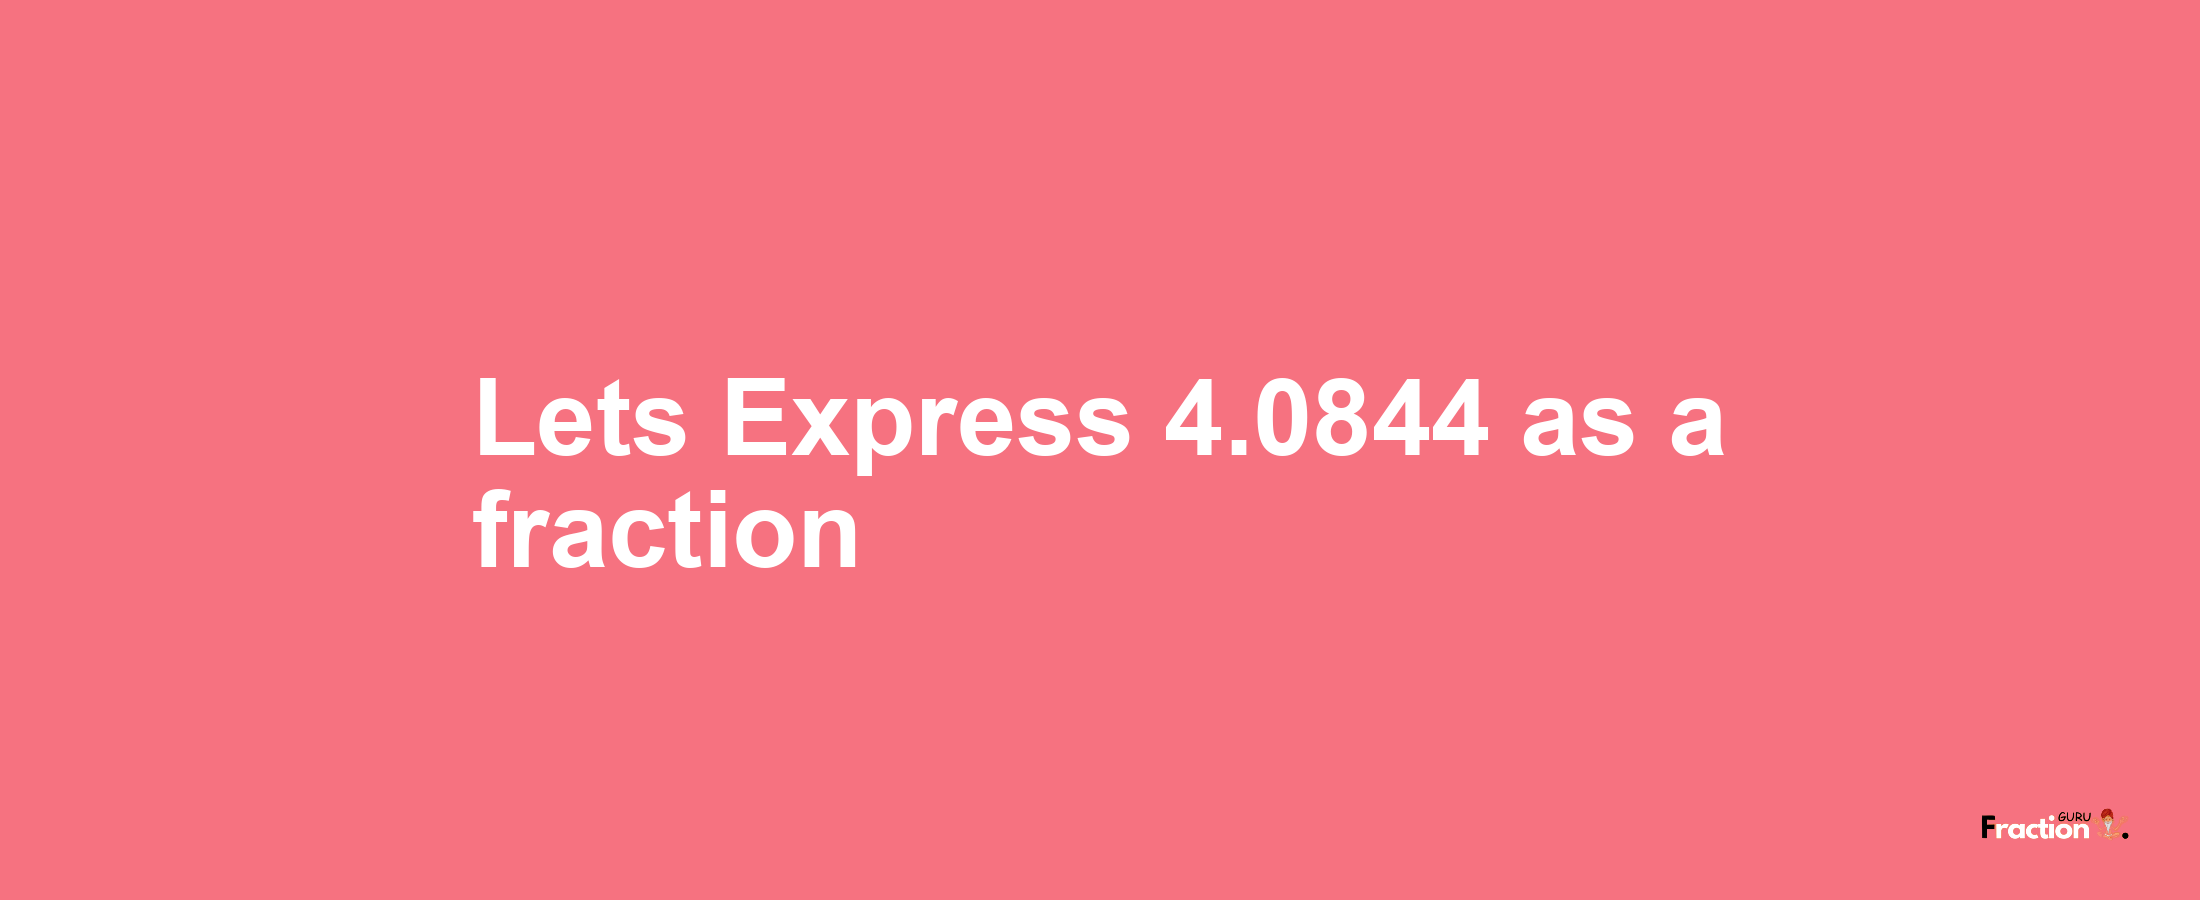 Lets Express 4.0844 as afraction